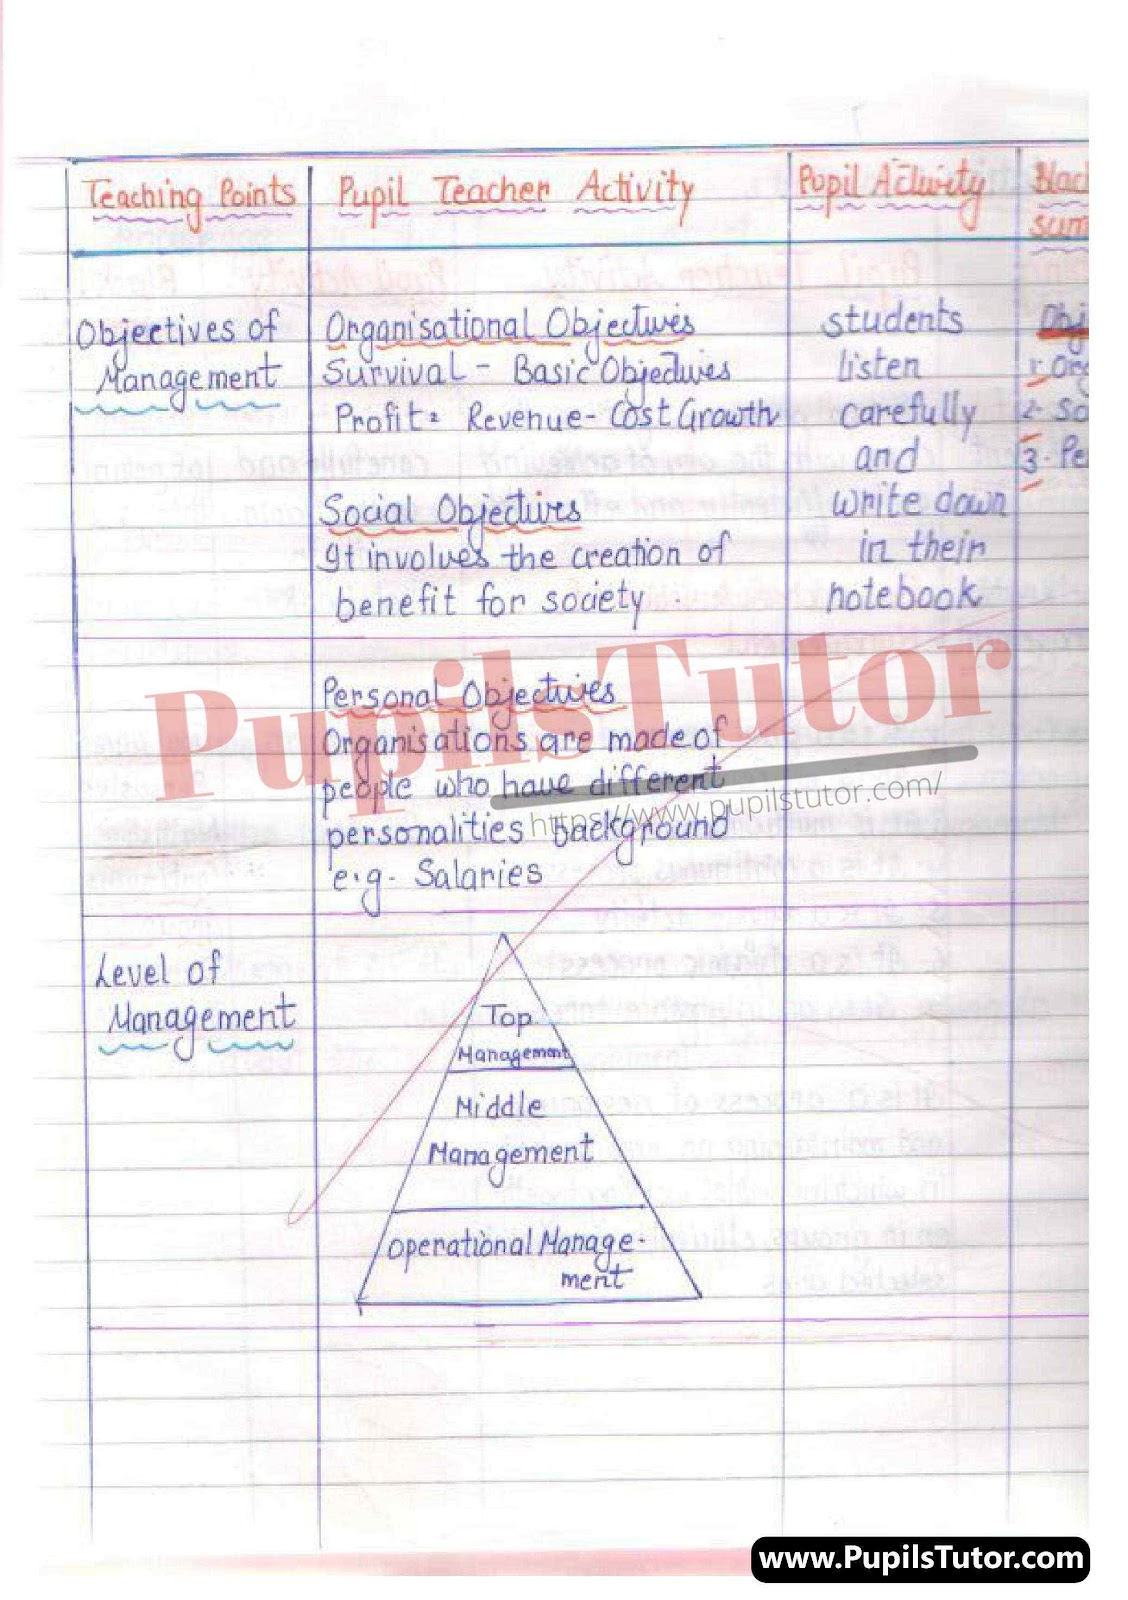 Lesson Plan On Levels Of Management For Class 12th.  – [Page And Pic Number 5] – https://www.pupilstutor.com/